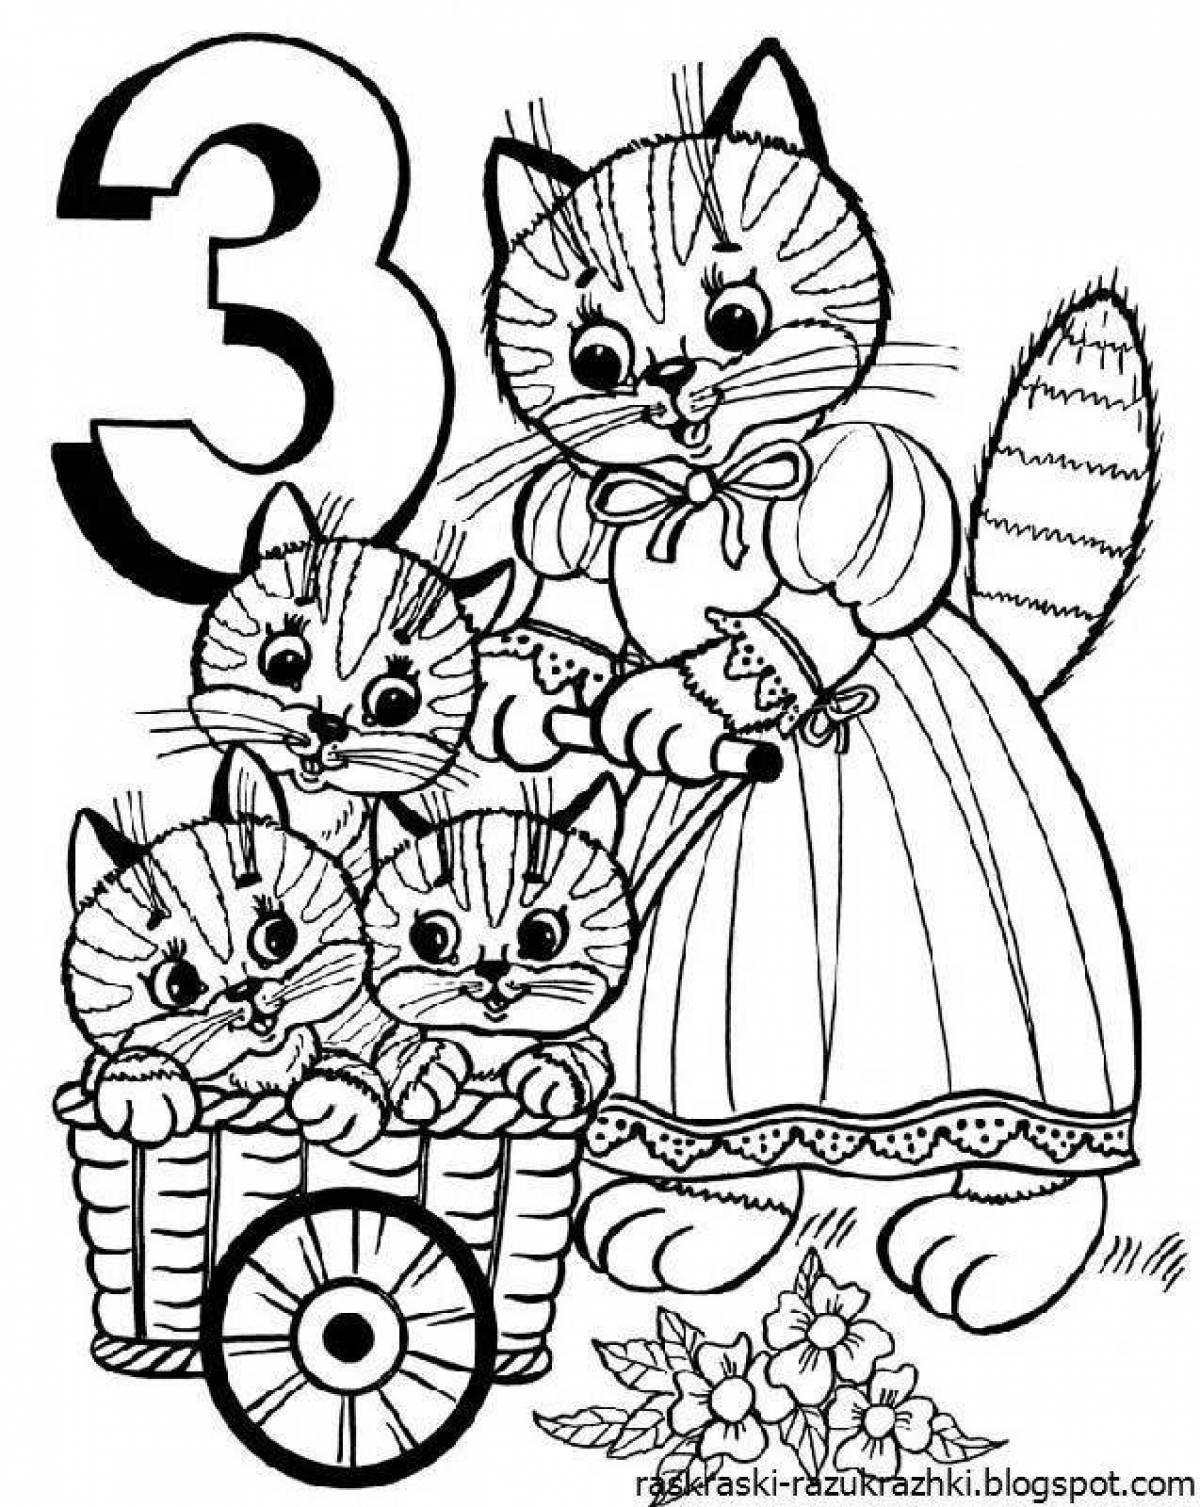 Fun coloring book for kids 7-9 years old